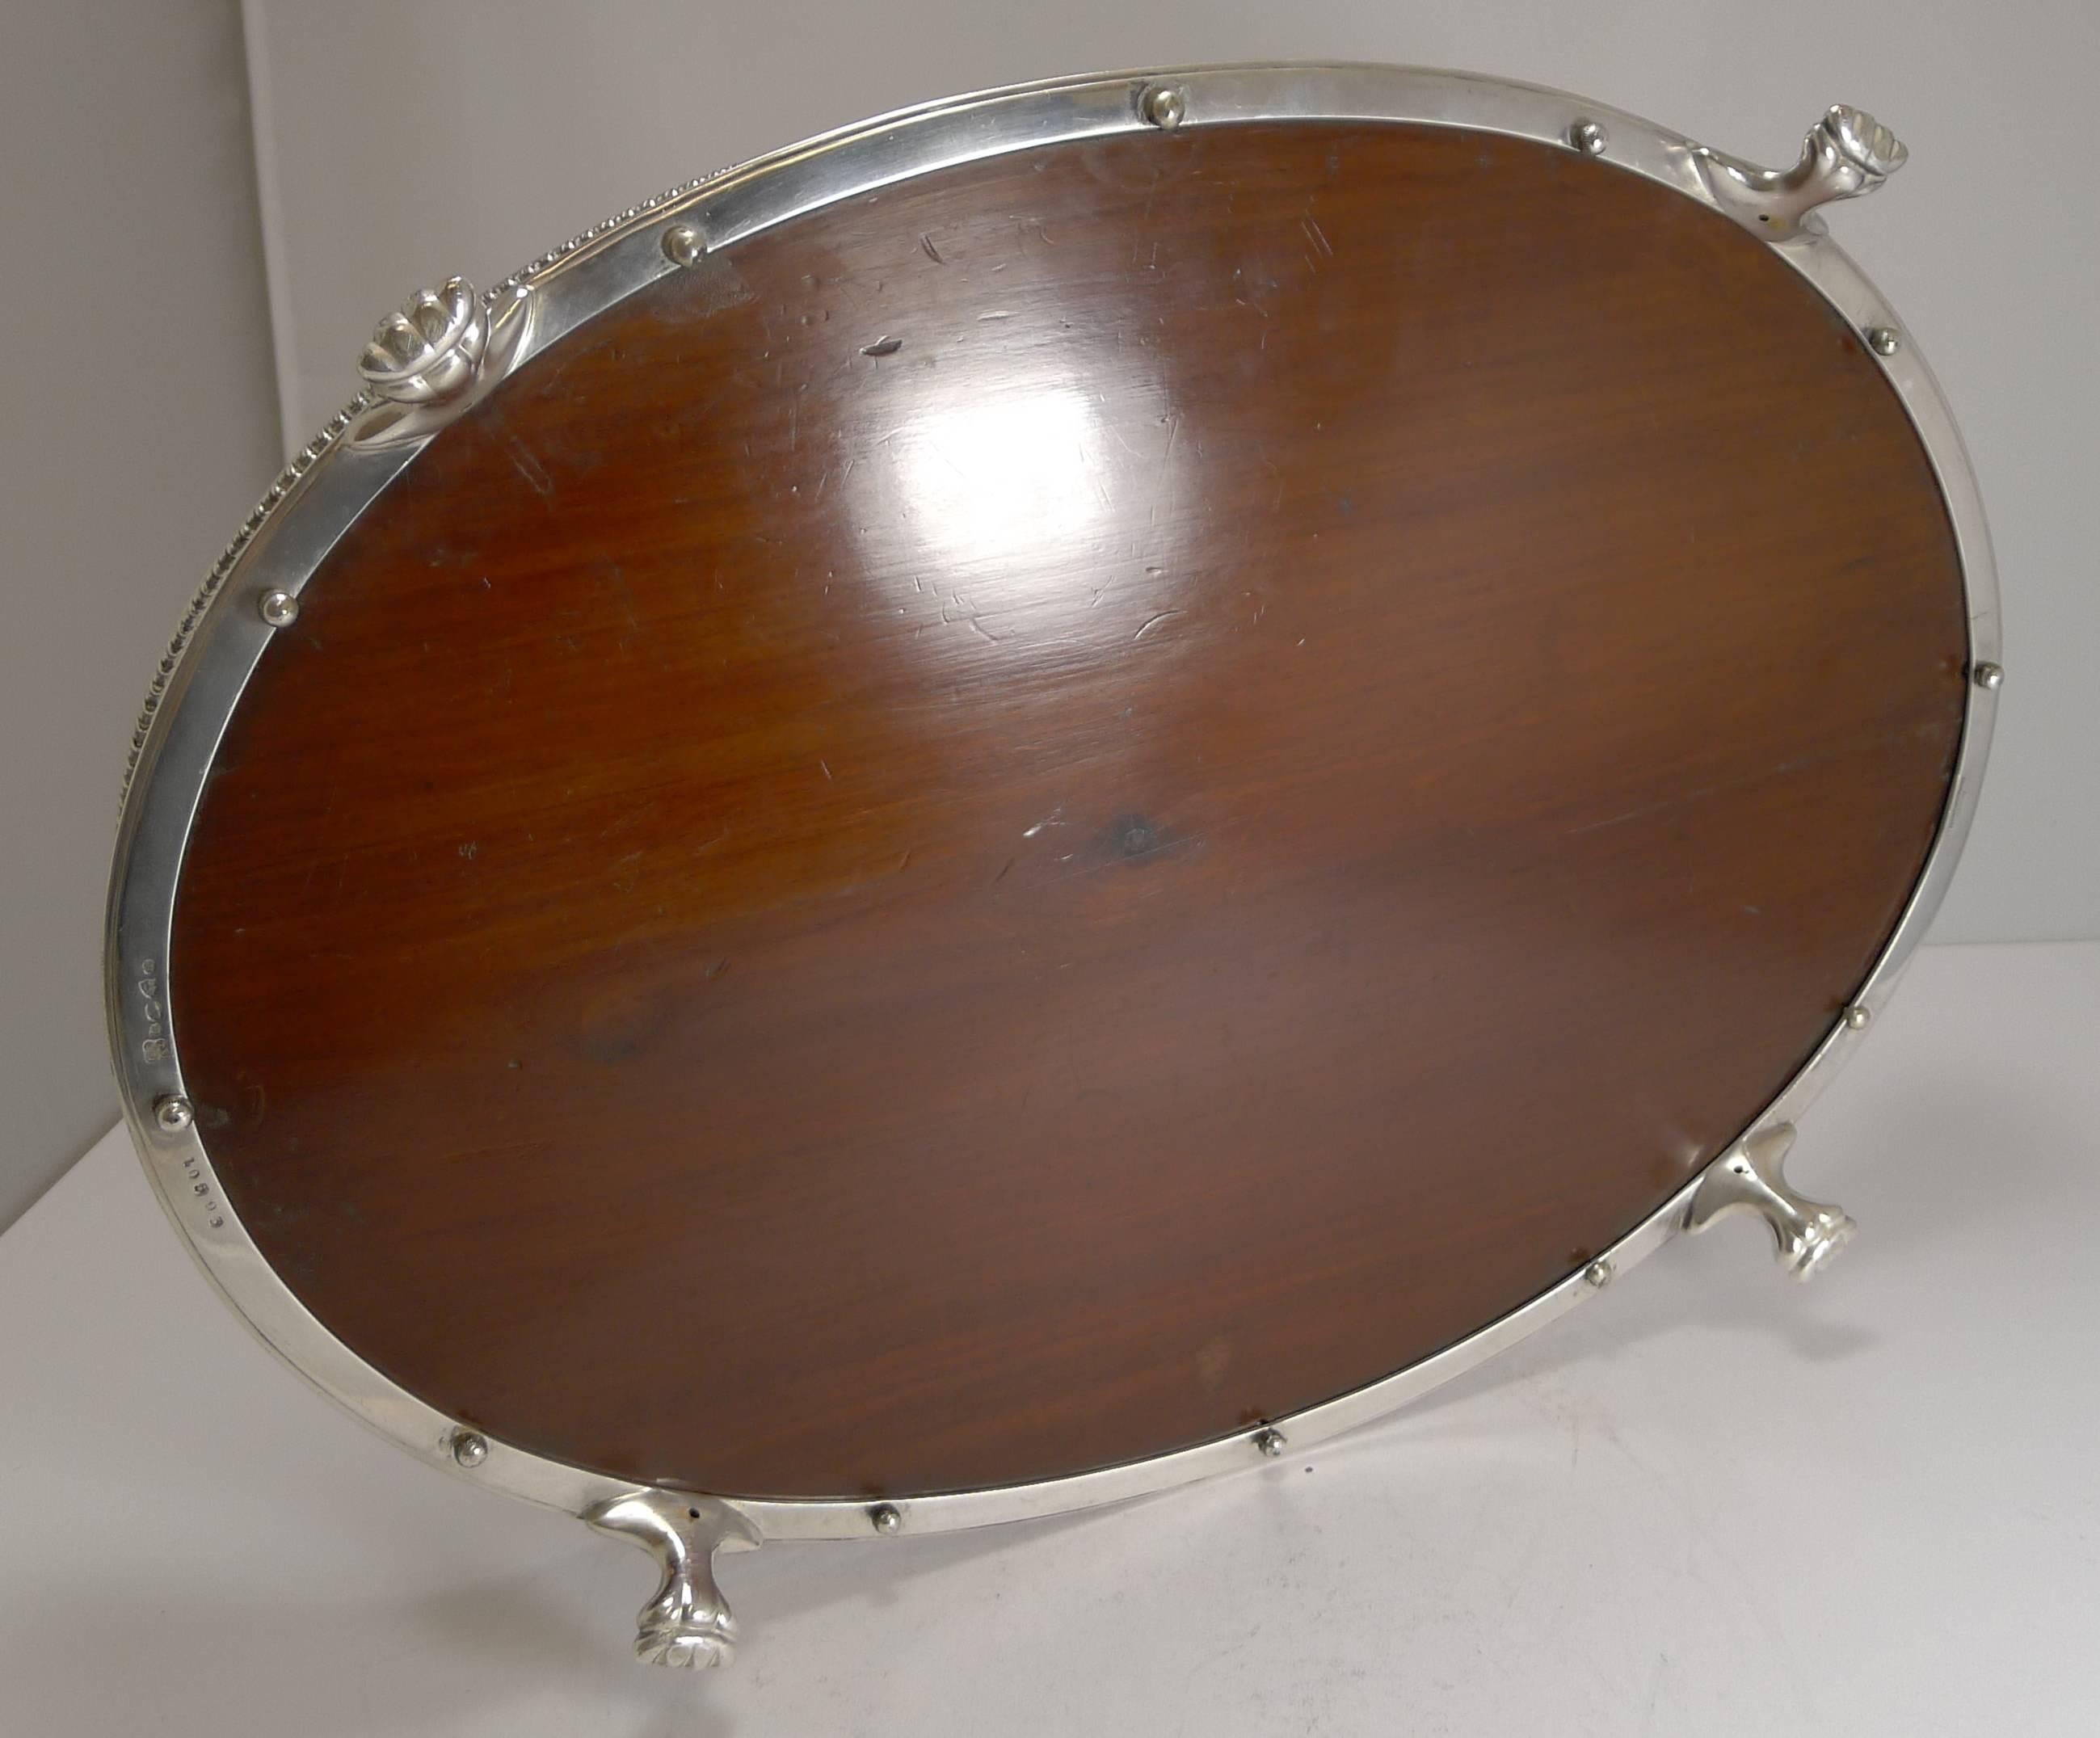 A top-notch late Victorian galleried tray made from fruitwood and silver plate.

The gallery is beautifully pierced or reticulated with stylish cut-out handles to each end. The tray sits of four magnificent and grand Lion's paw feet and the